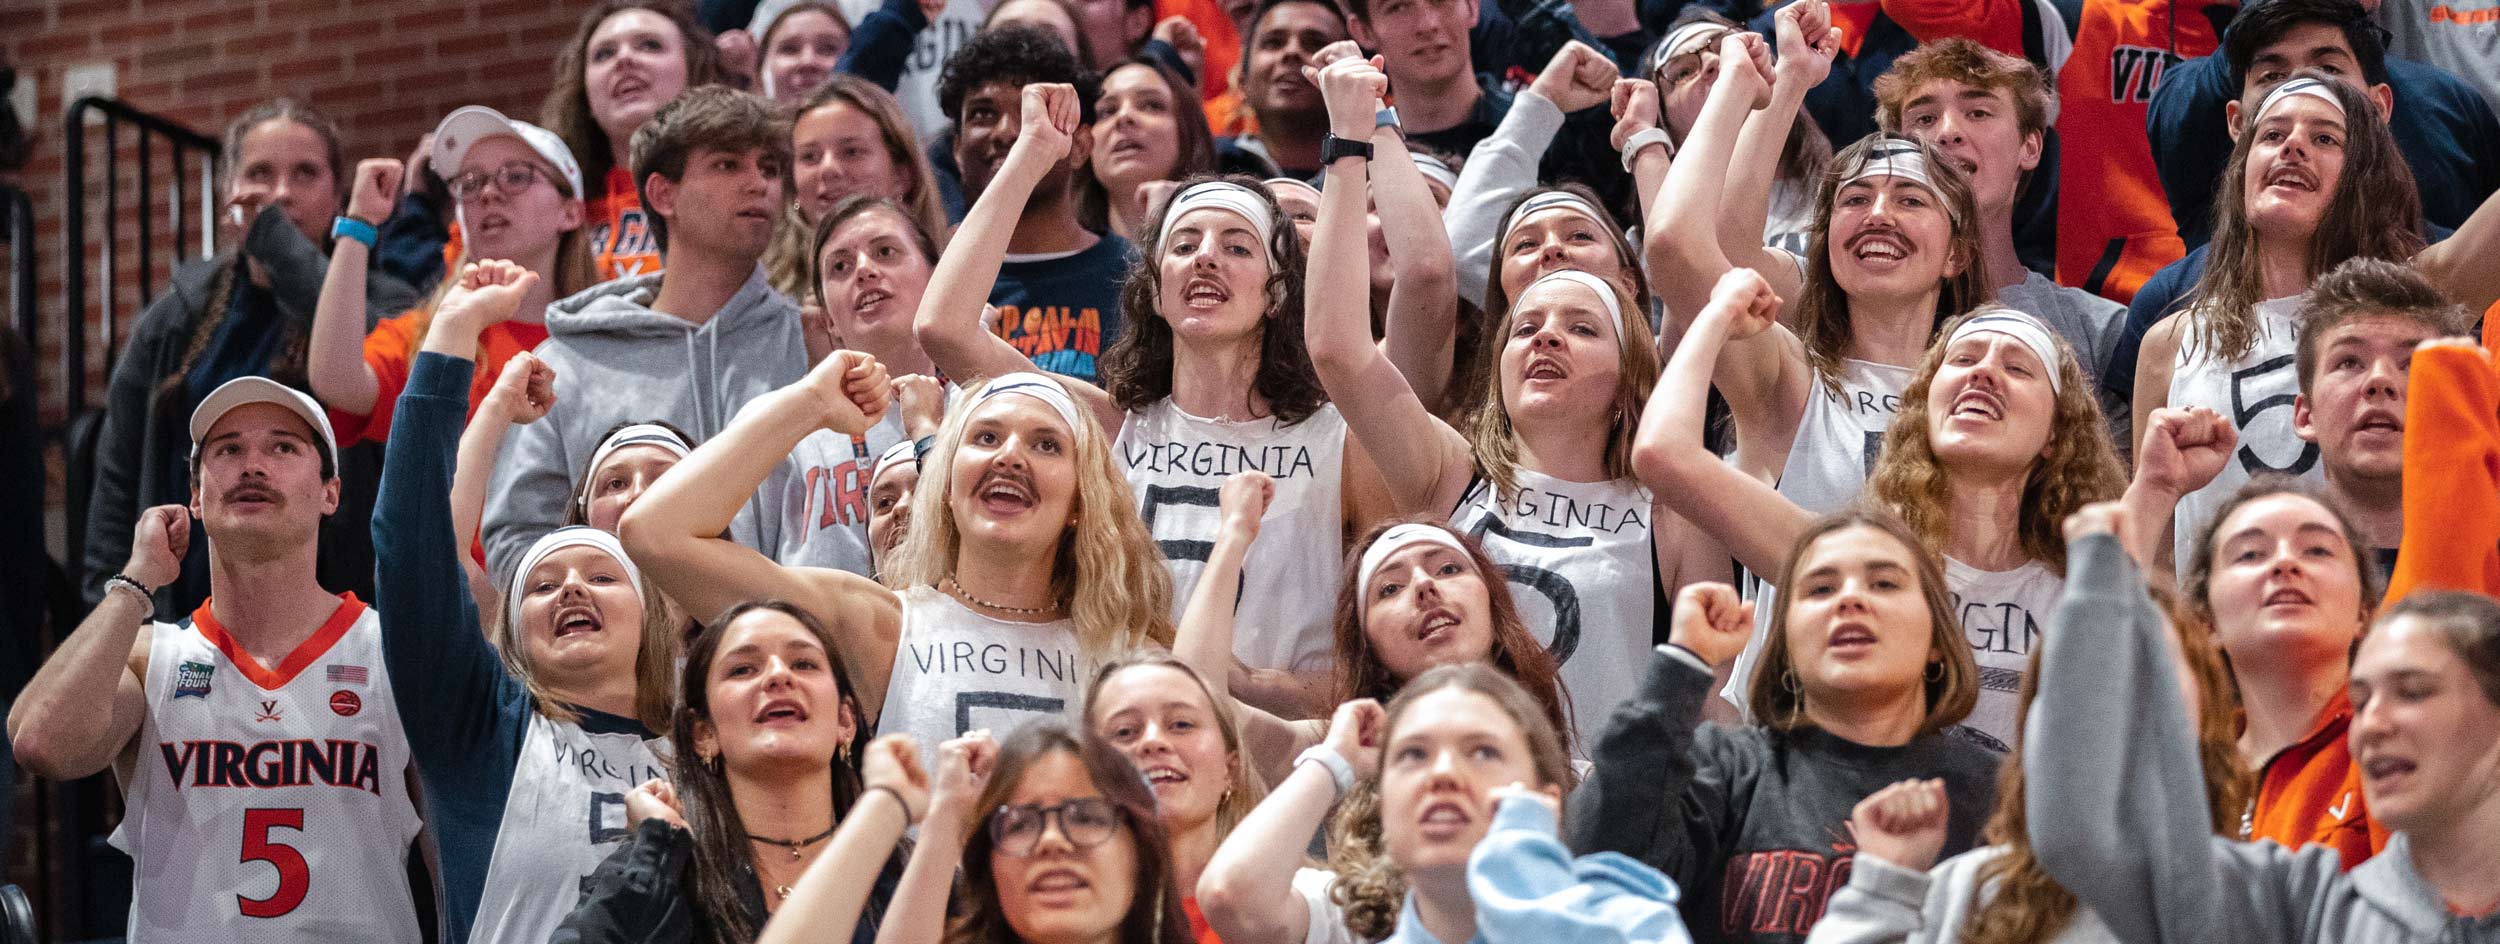 A crowd of students wearing headbands, fake mustaches, and sleeveless white tee shirts with the number 5 written on them cheering at a UVA Men's Basketball game